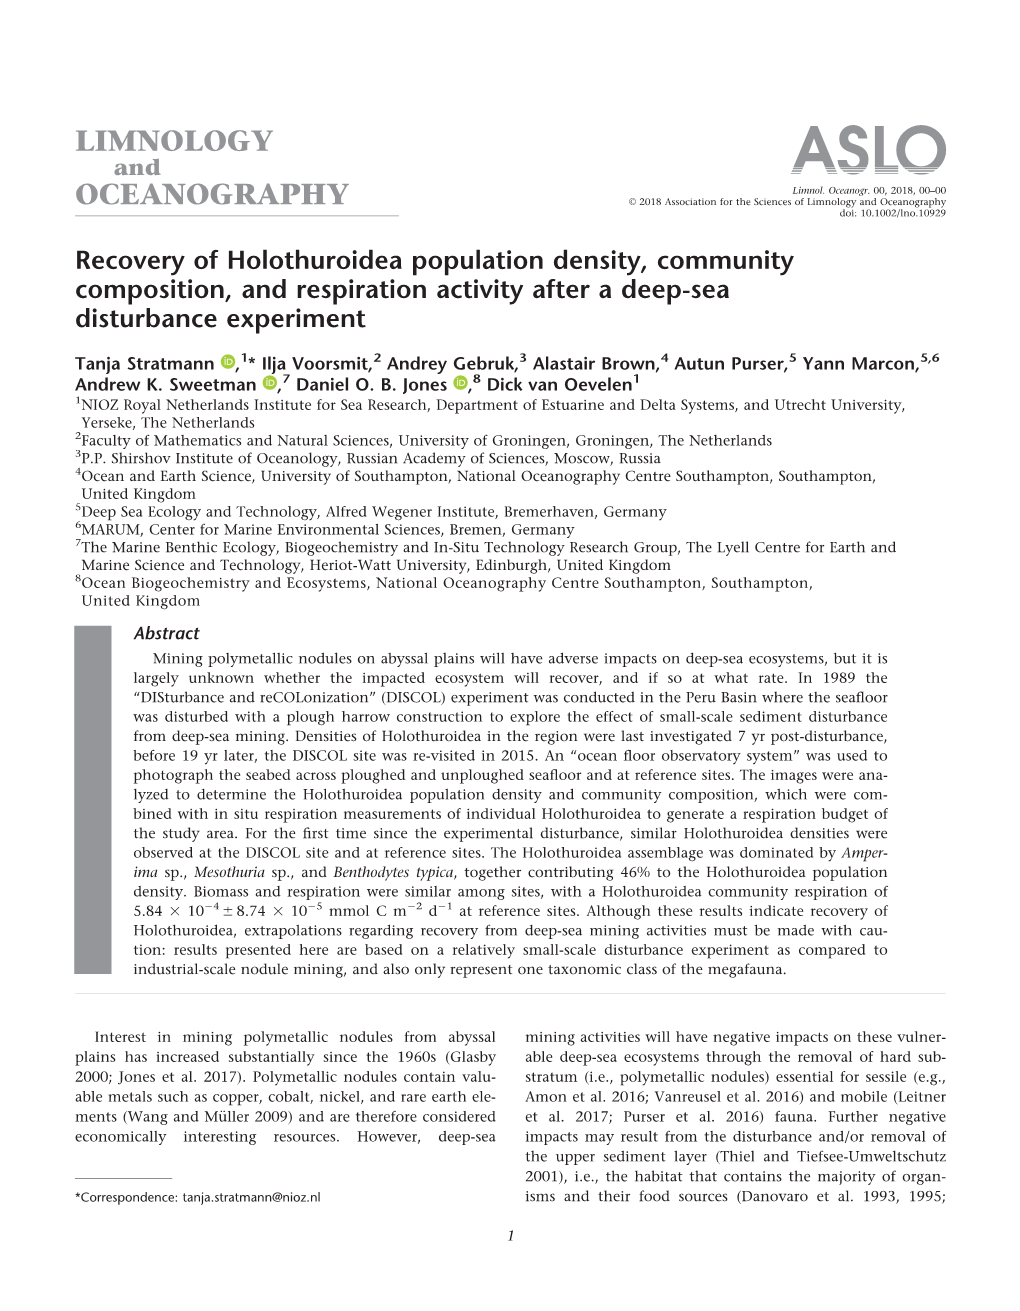 Recovery of Holothuroidea Population Density, Community Composition, and Respiration Activity After a Deep-Sea Disturbance Experiment